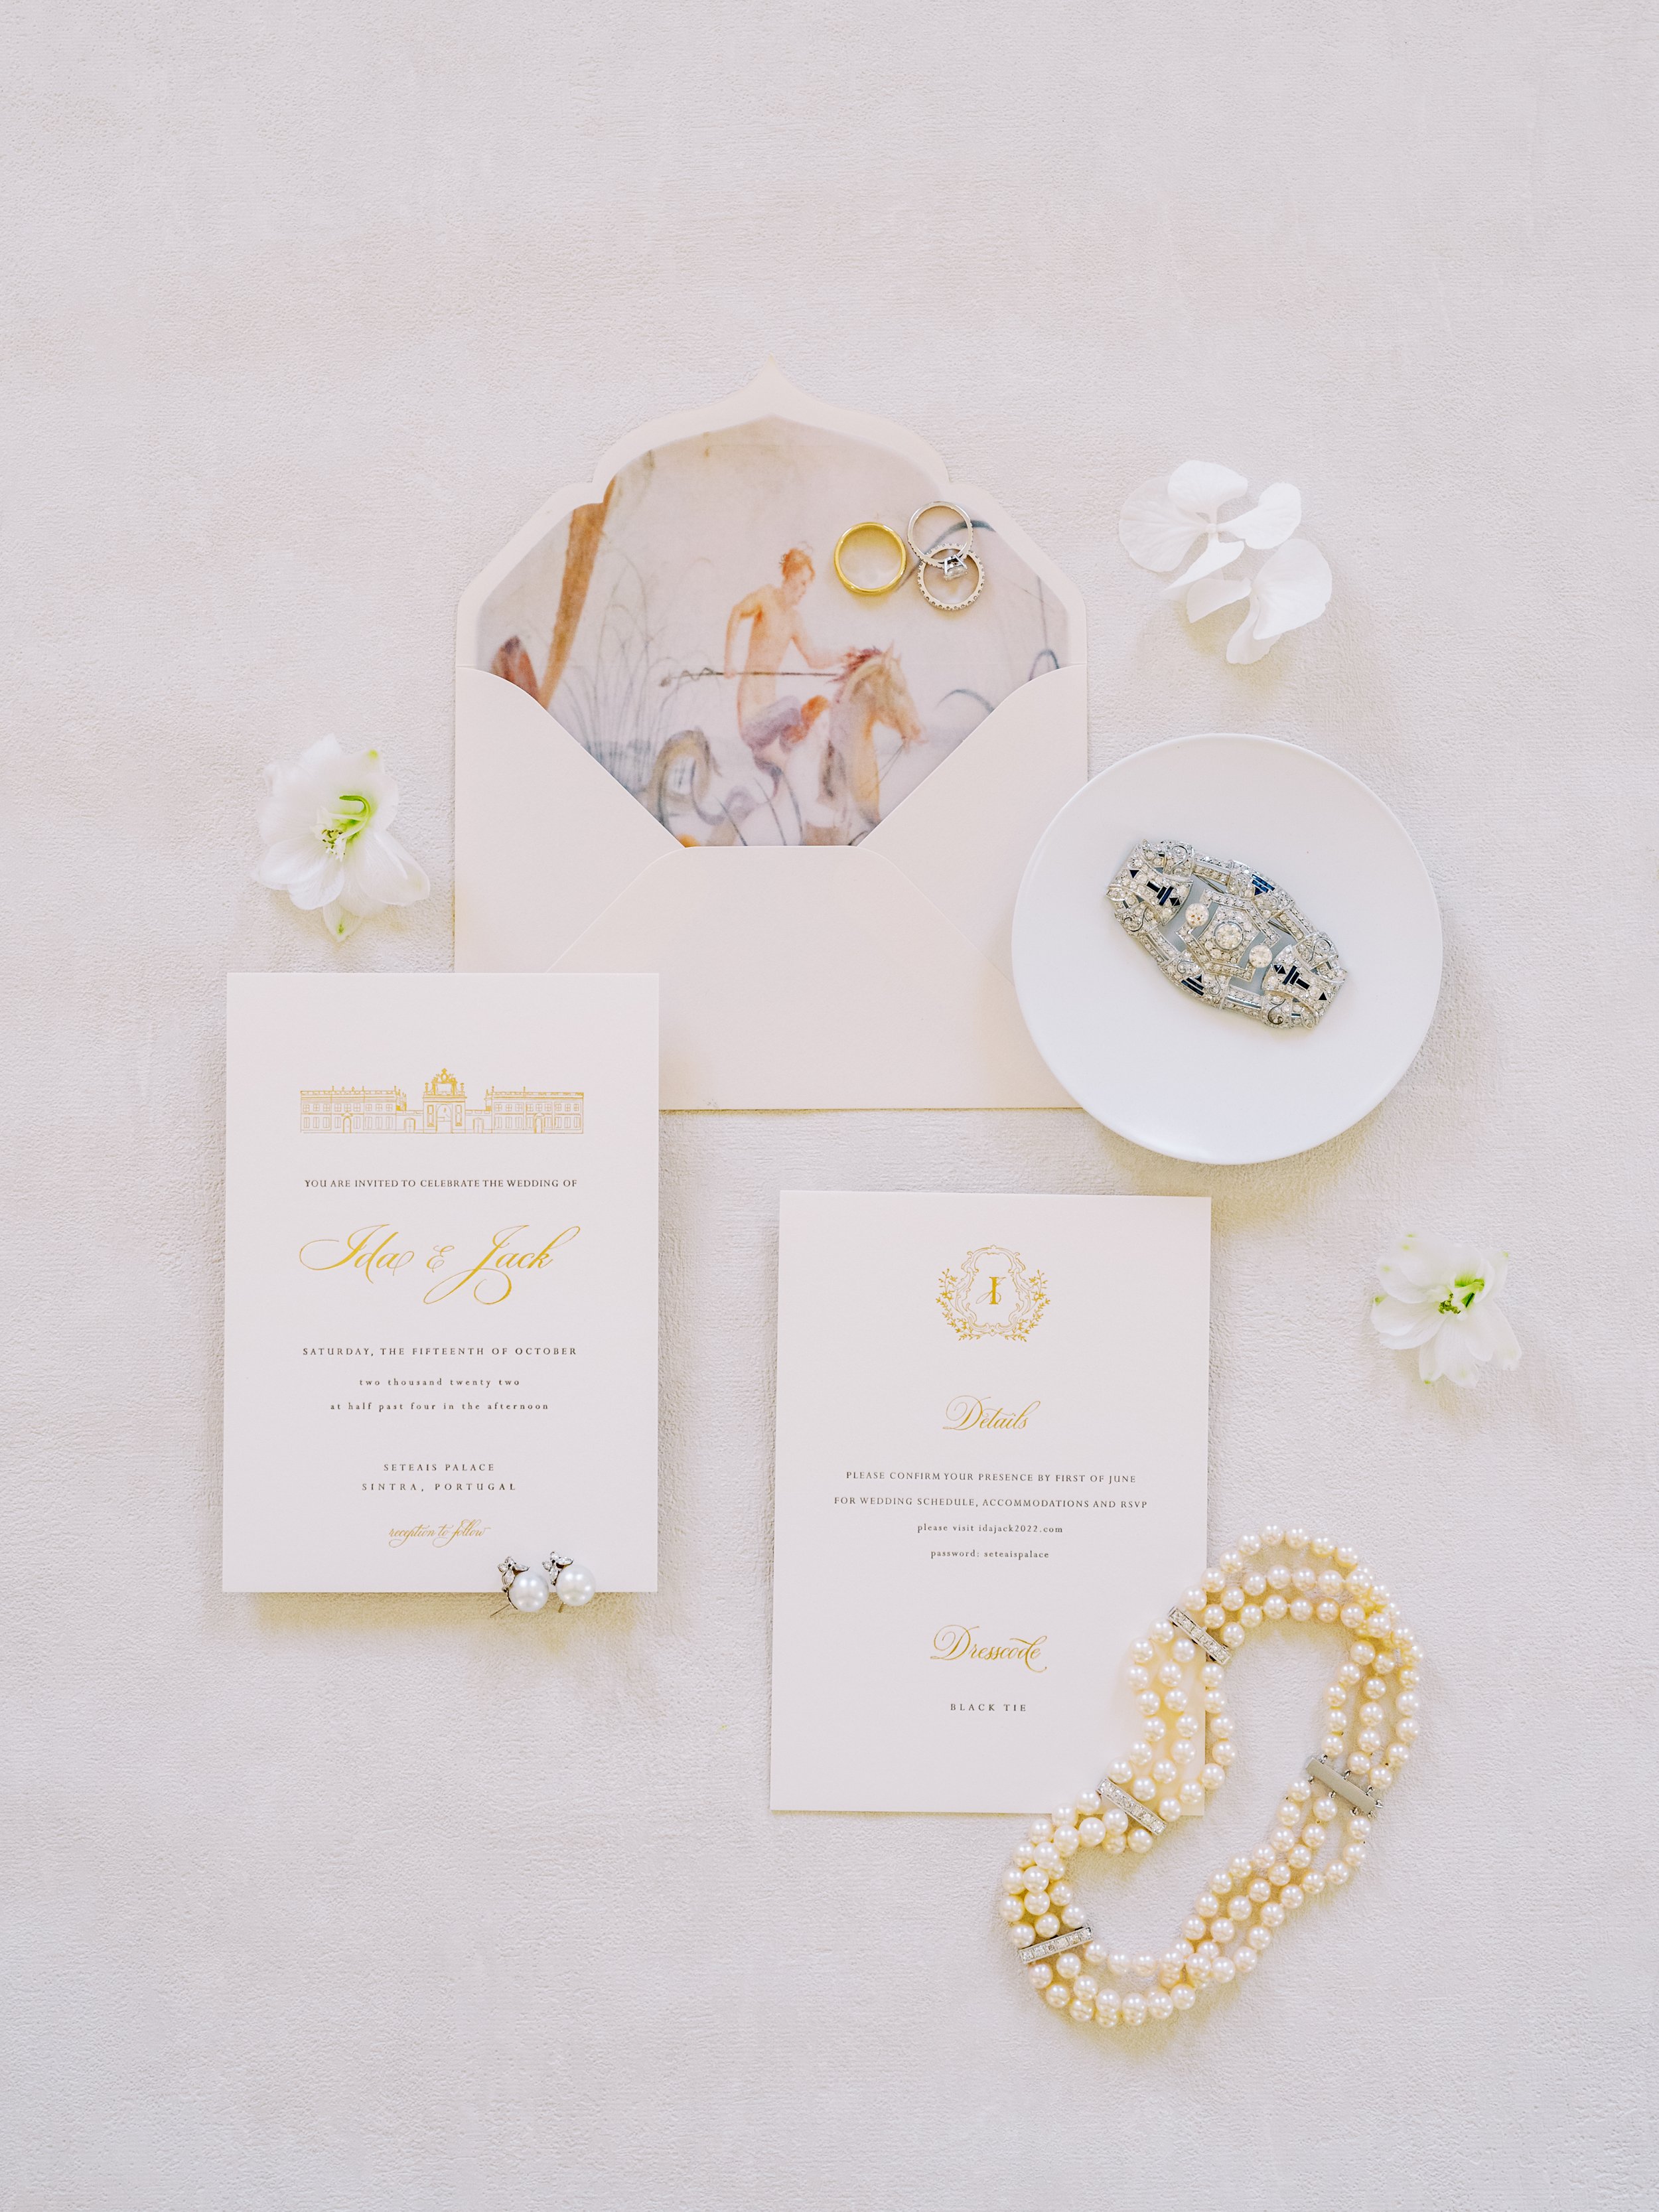 A flat lay with elegant style showing the wedding stationary and jewellary